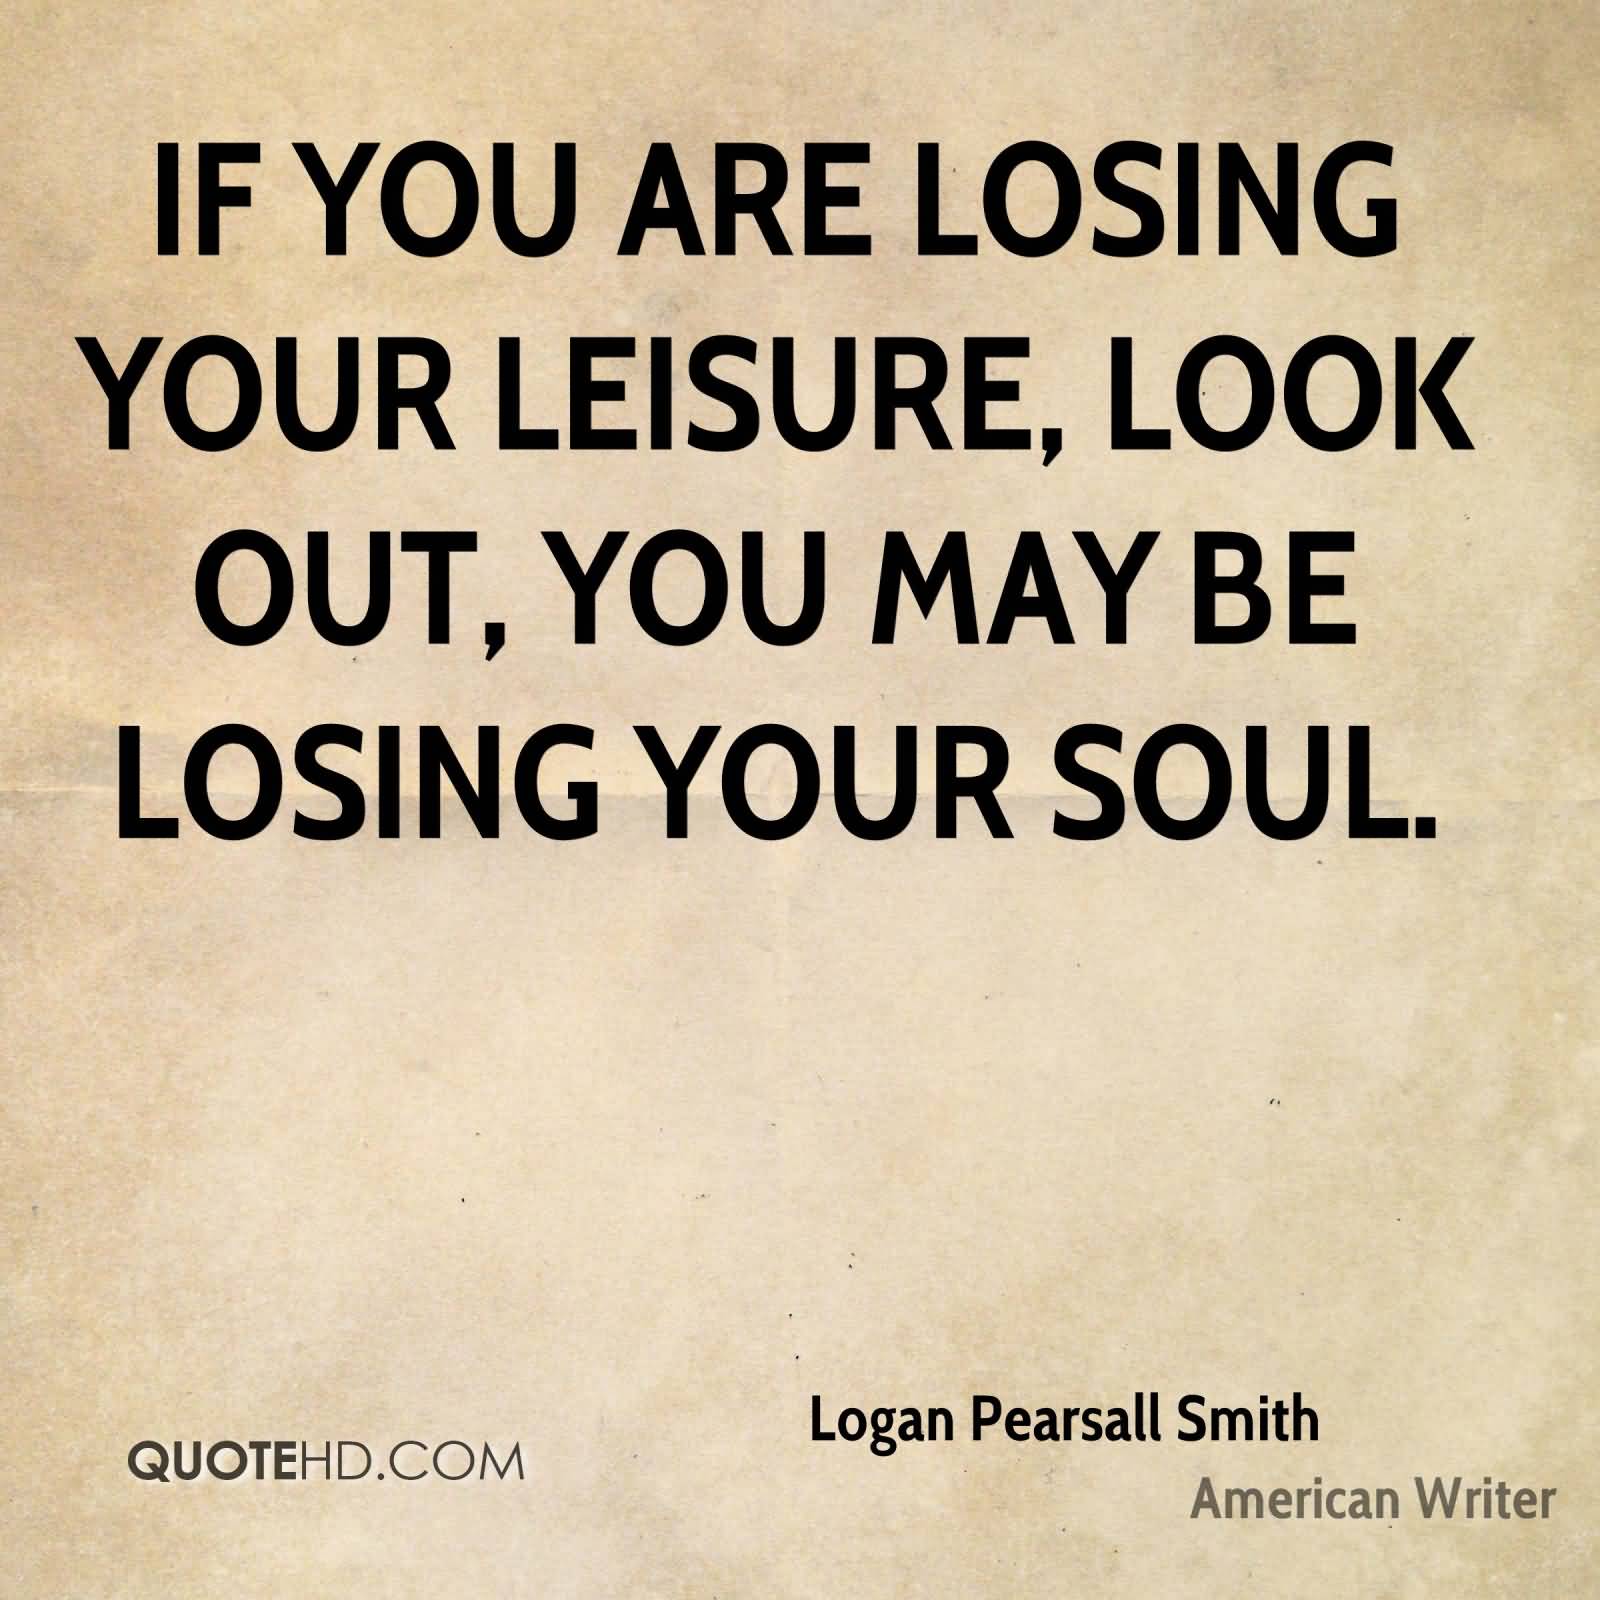 If you are losing your leisure, look out; you may be losing your soul. Logan Pearsall Smith